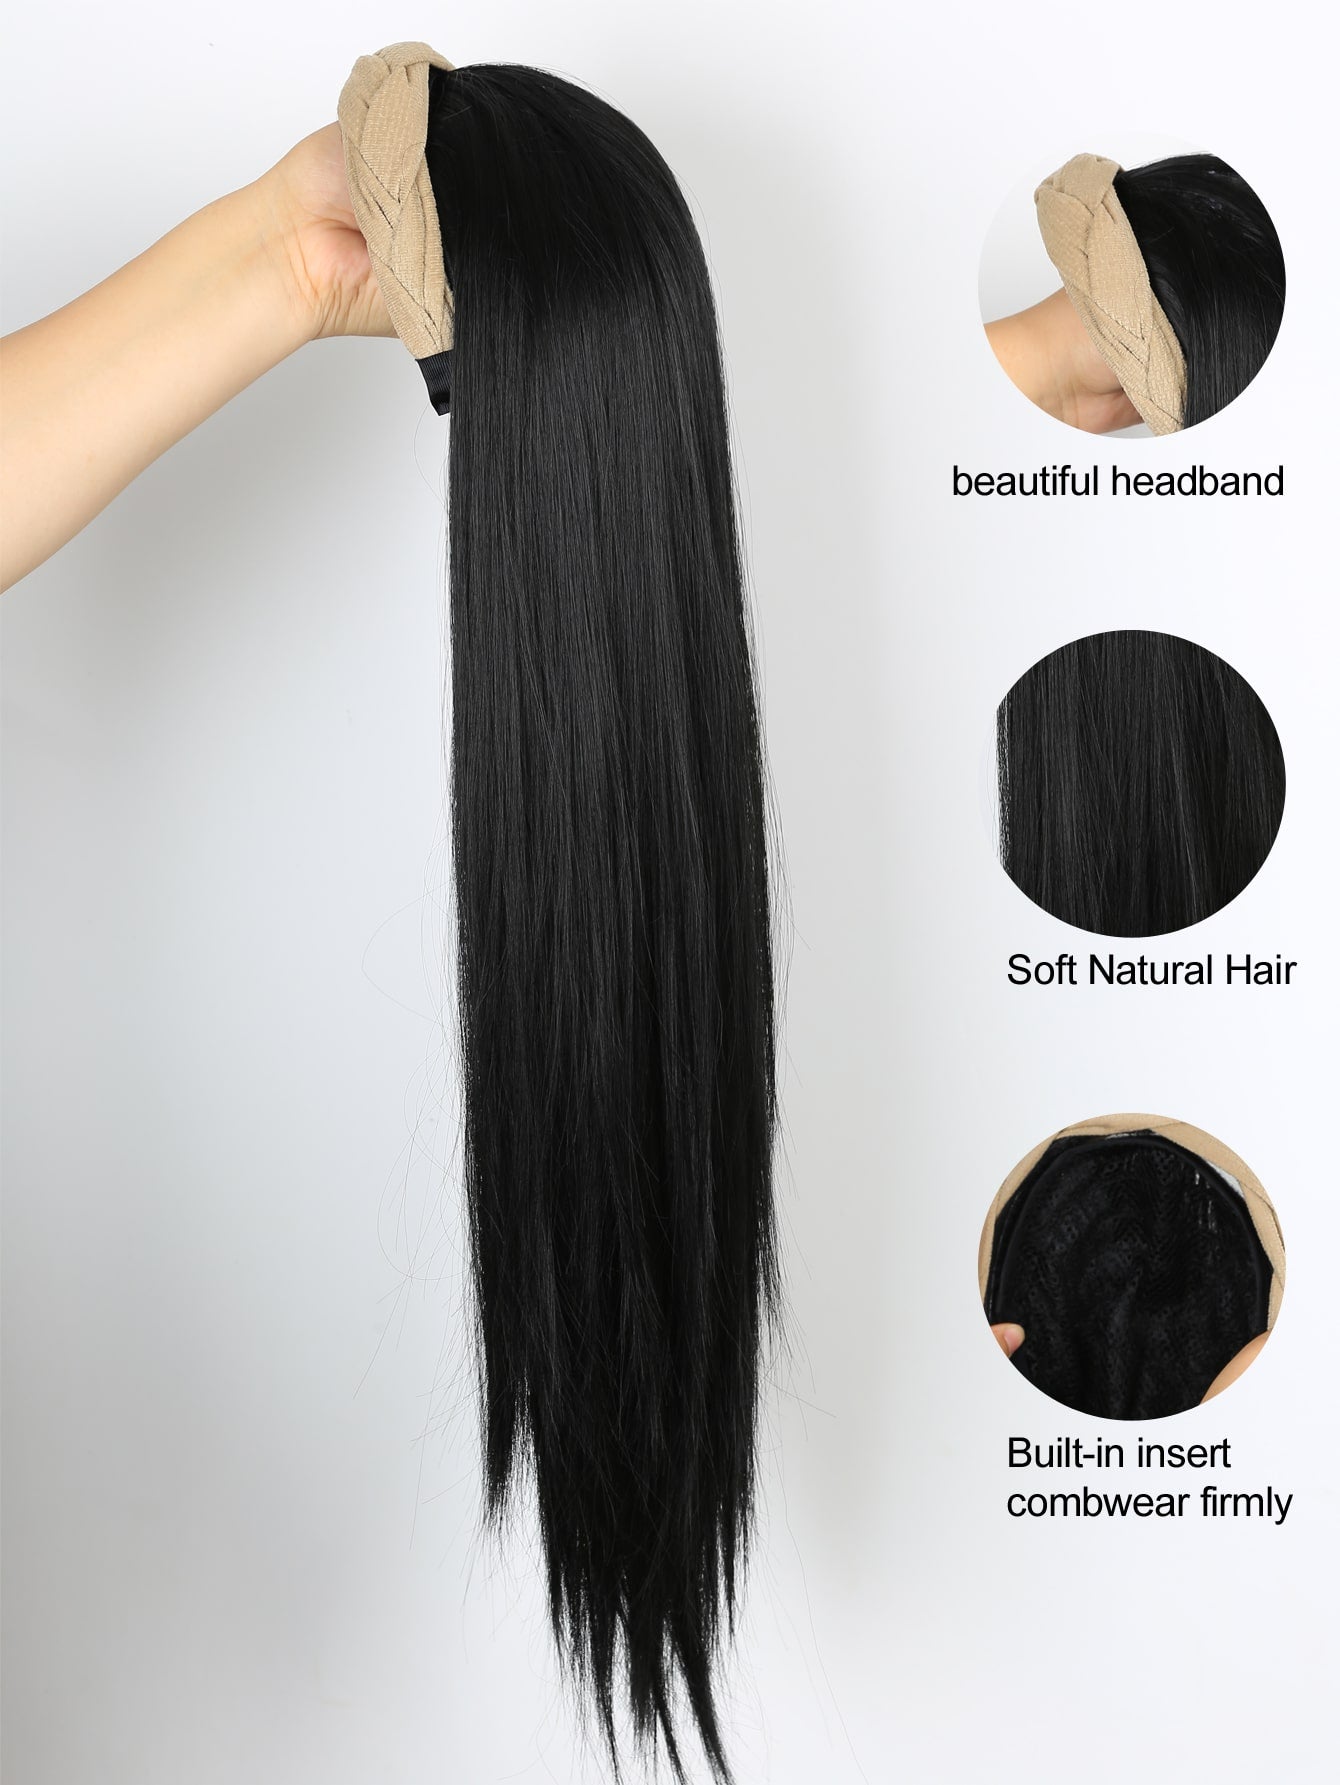 22inch Long Straight Hairpiece Removable Headband Wig brown's Synthetic Cover Wig Natural Straight Natural Hairpiece half wig - Negative Apparel